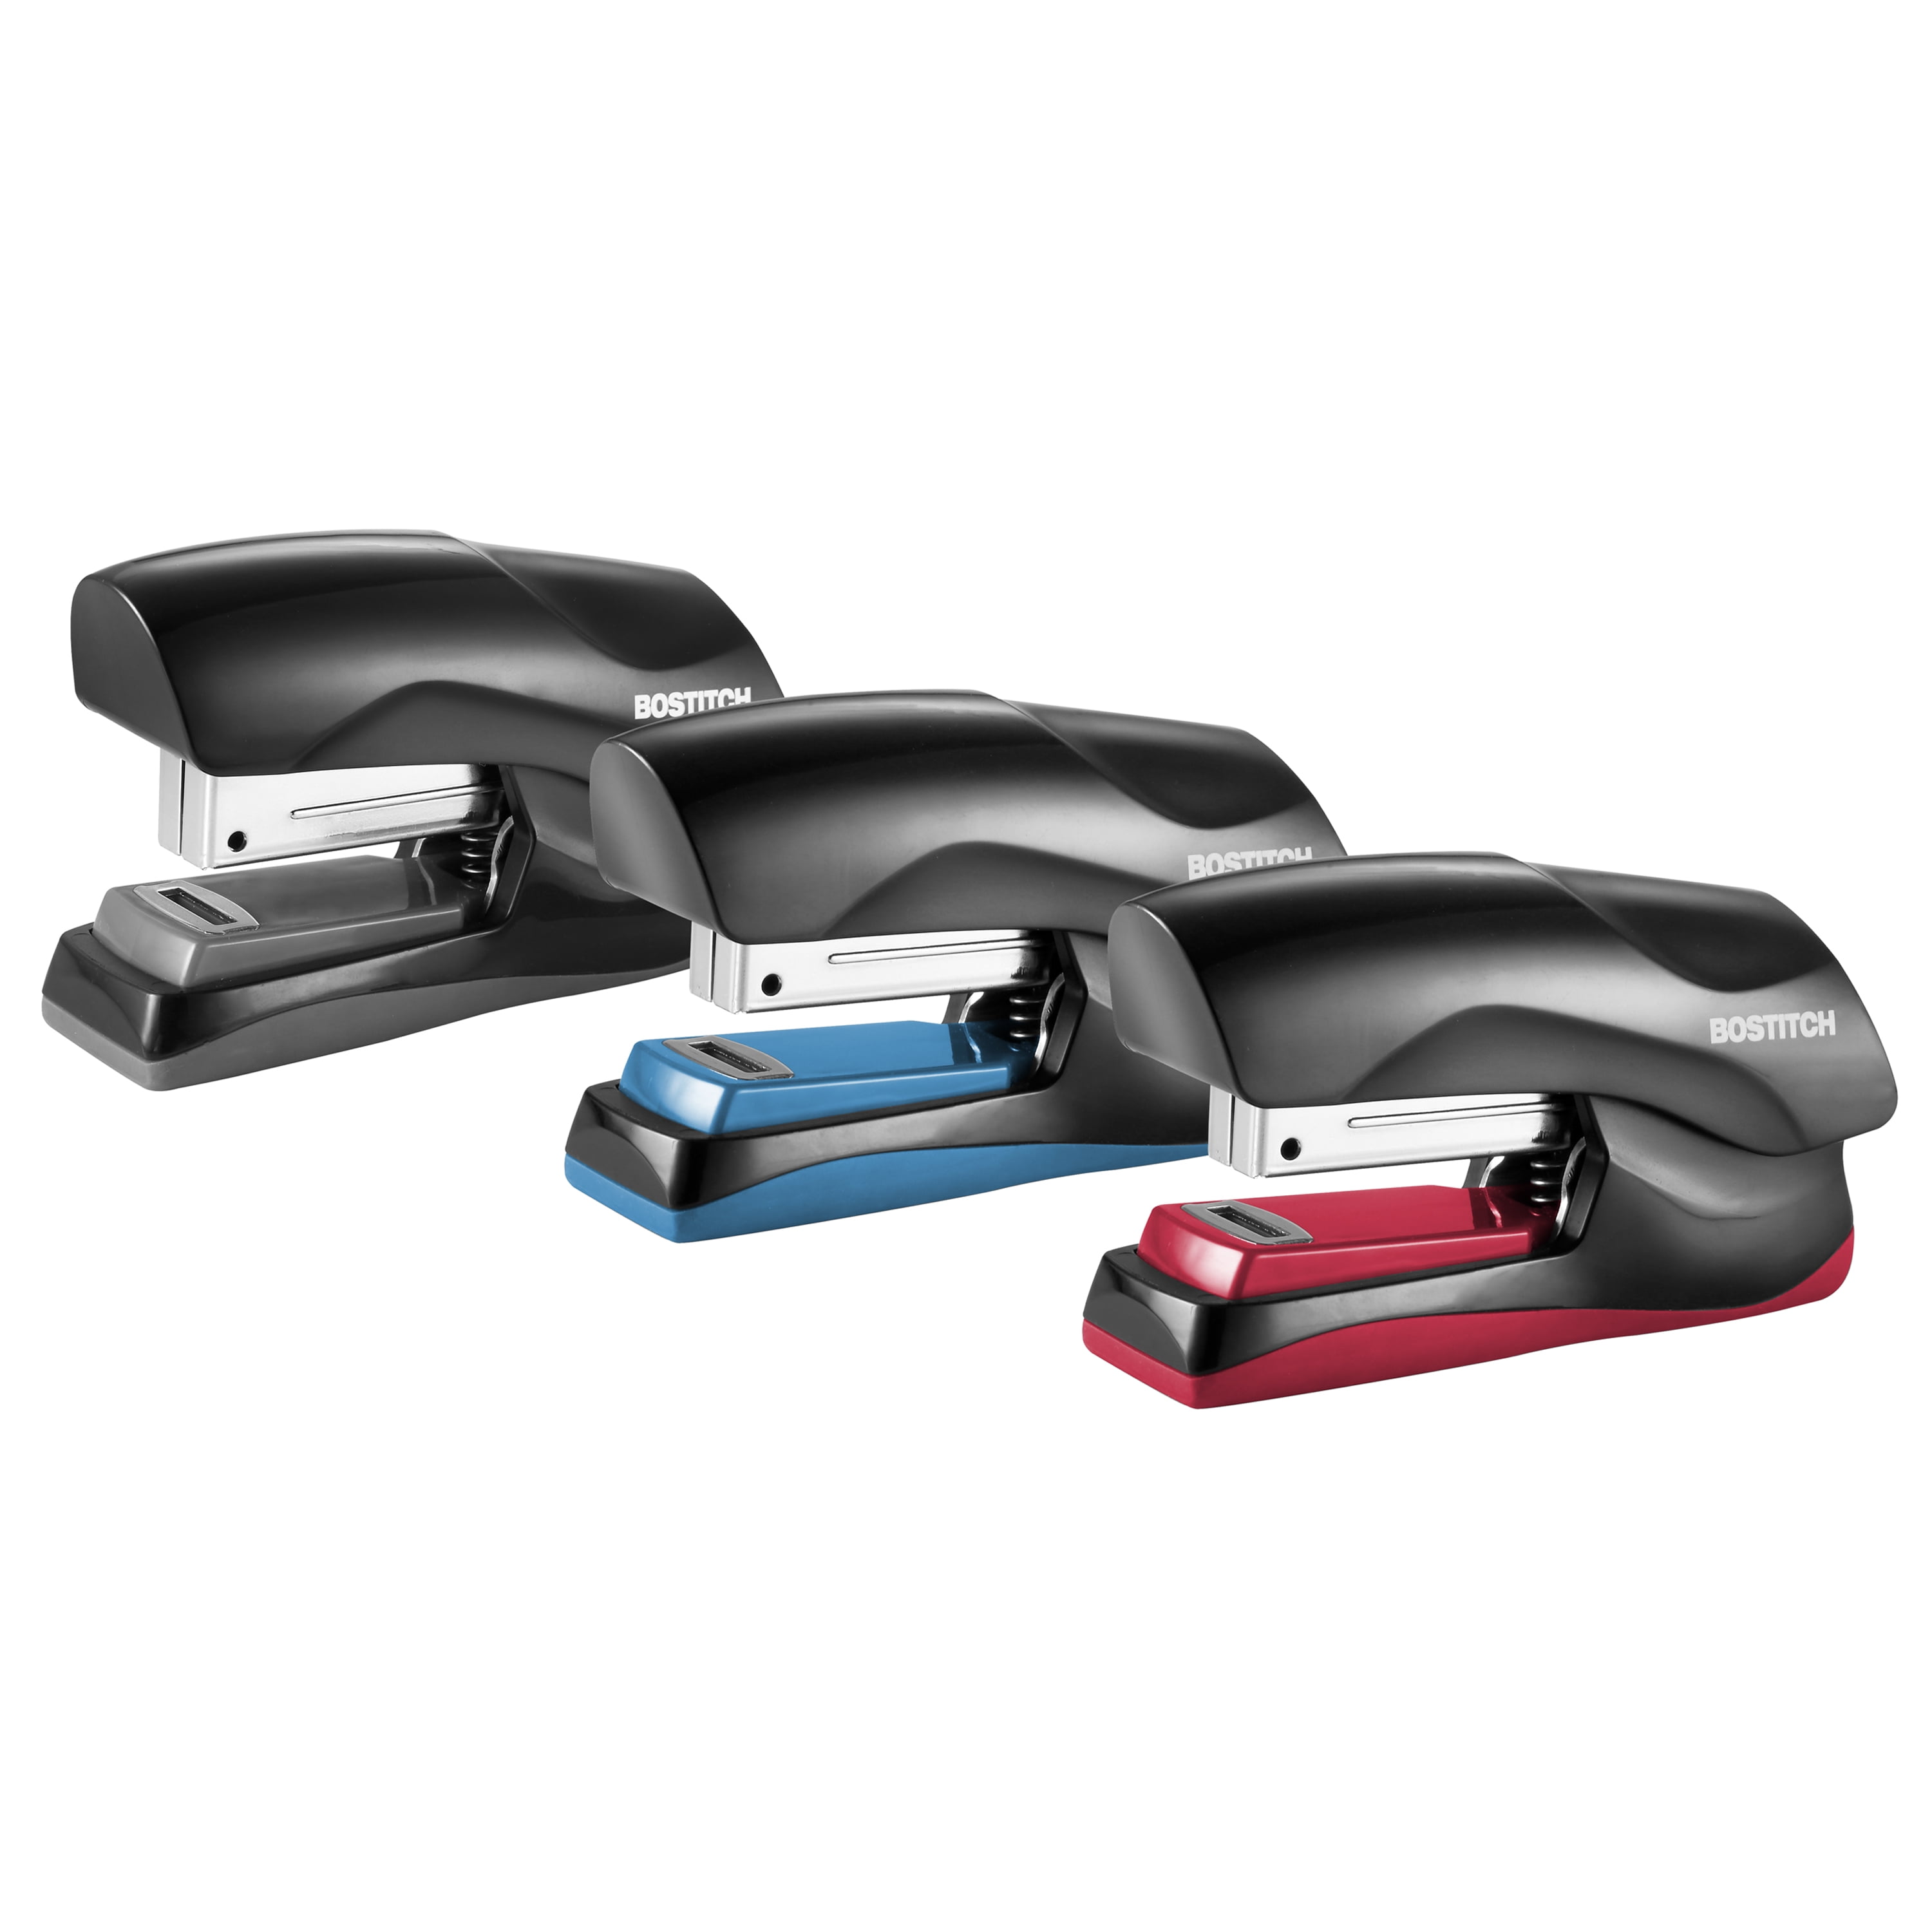 Black 3-Pack Small Stapler Size Office Heavy Duty 40 Sheet Stapler Fits into The Palm of Your Hand; 3-Pack 1 